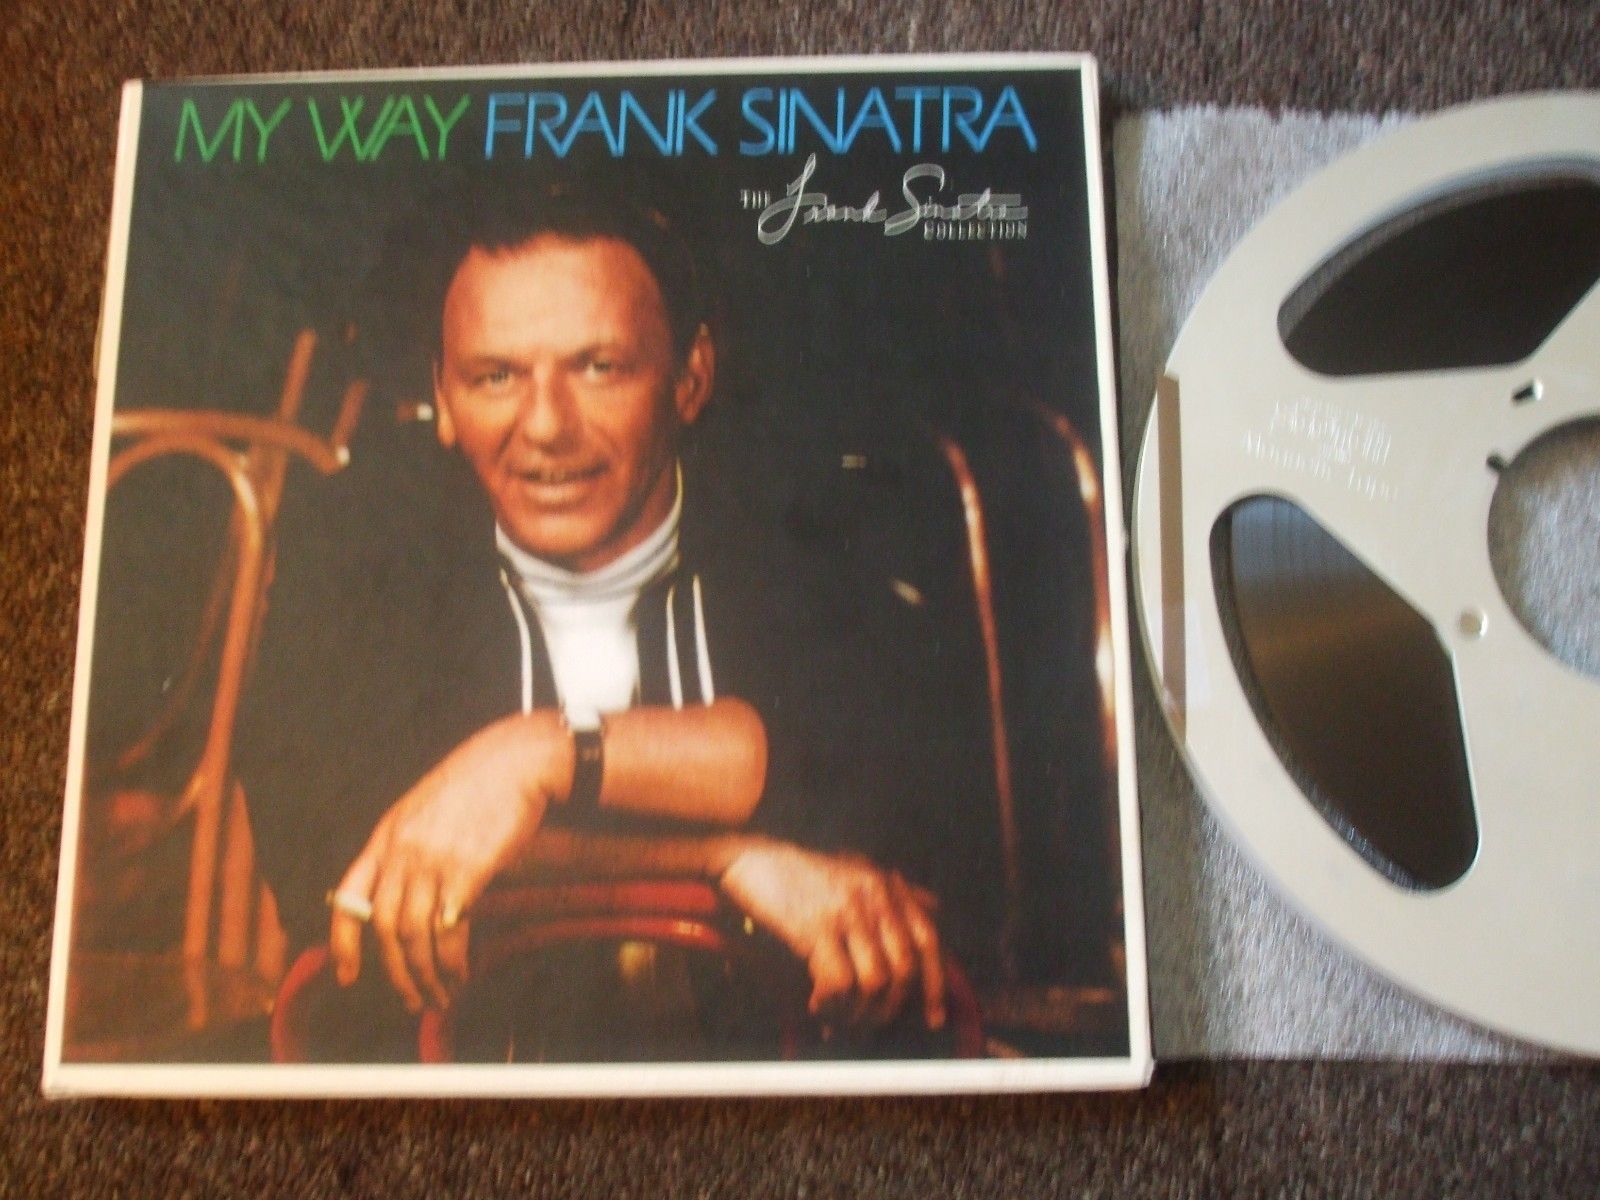  FRANK SINATRA - MY WAY - 2-TRACK 15 IPS 10.5 REEL - auction  details